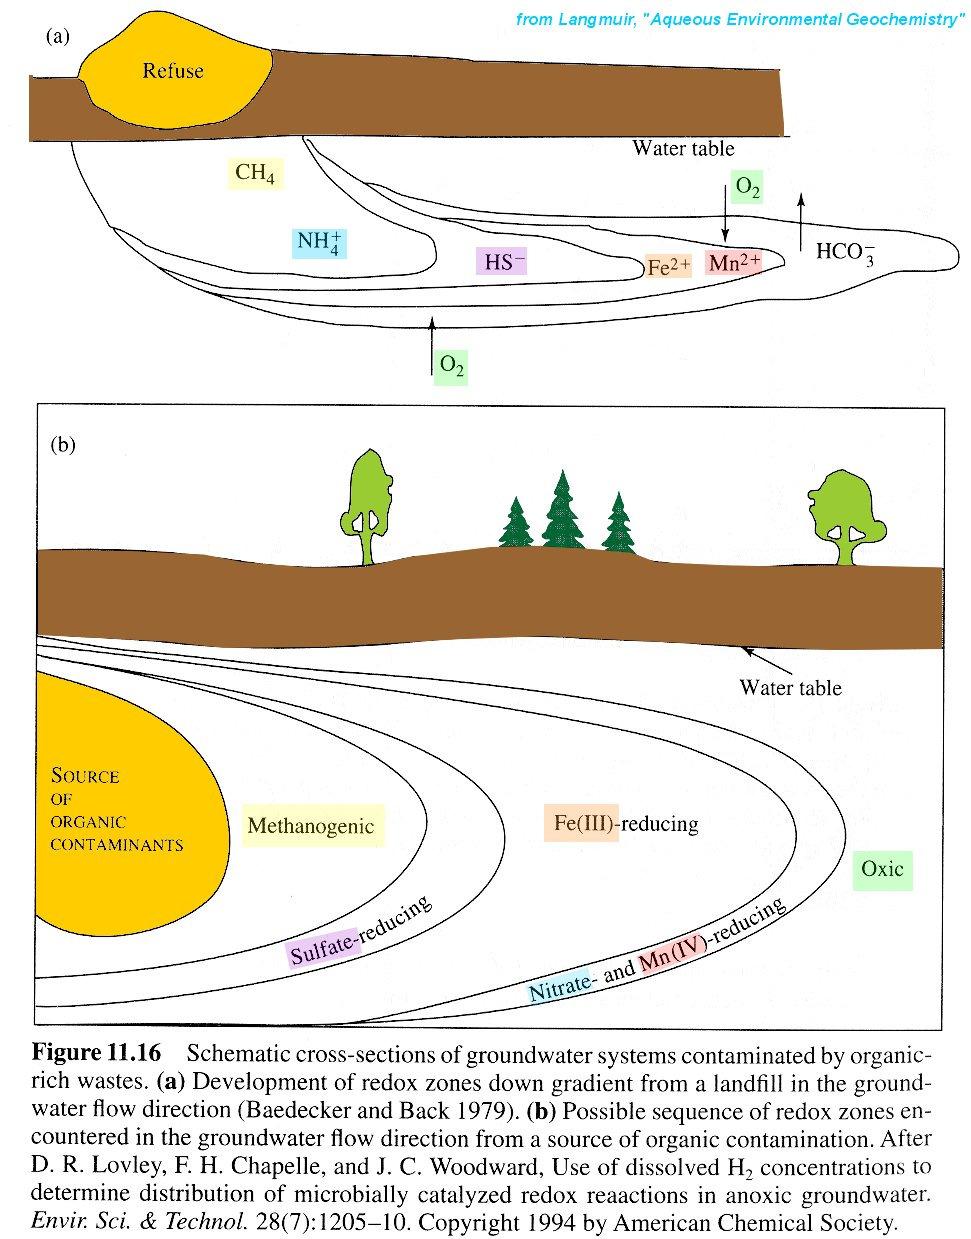 Redox Ladder transformations by Chemoautotrophs in polluted Environments: GROUNDWATER: Groundwater near a source of high BOD waste (such as beneath a municipal landfill)